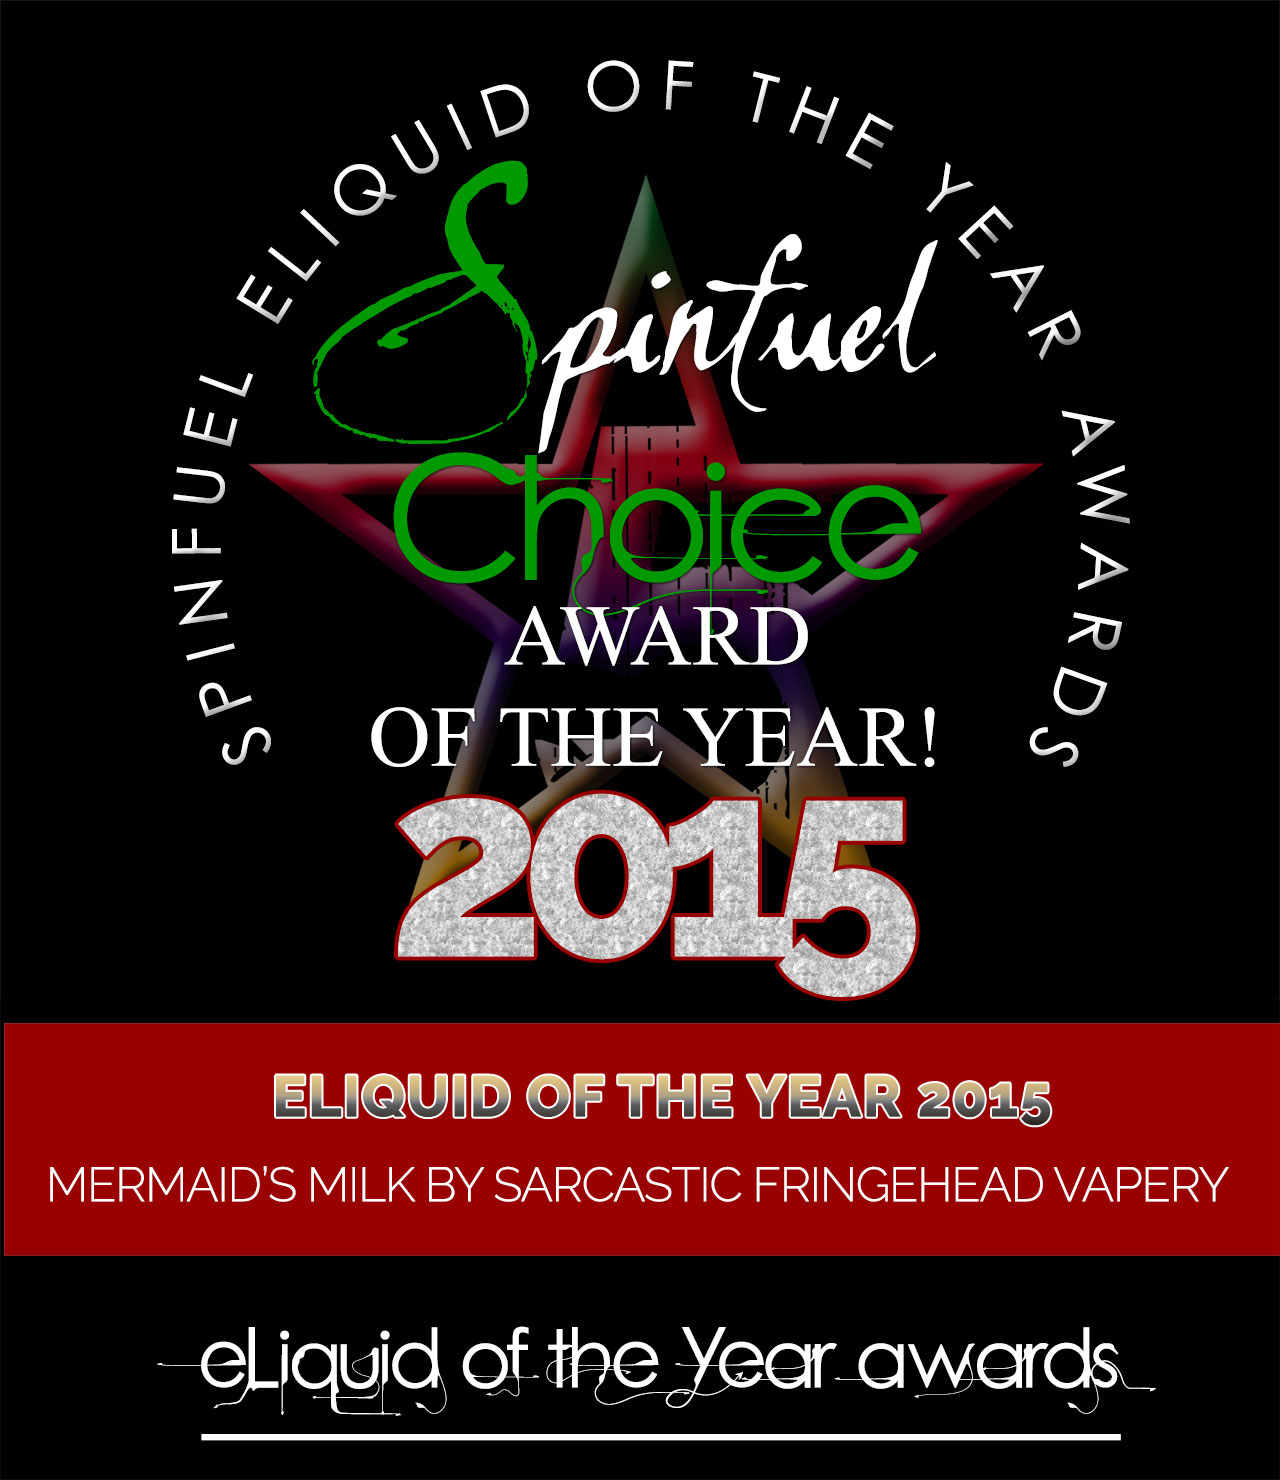 BST-OF-THE-YEAR-2015 - Spinfuel Choice Award 2015